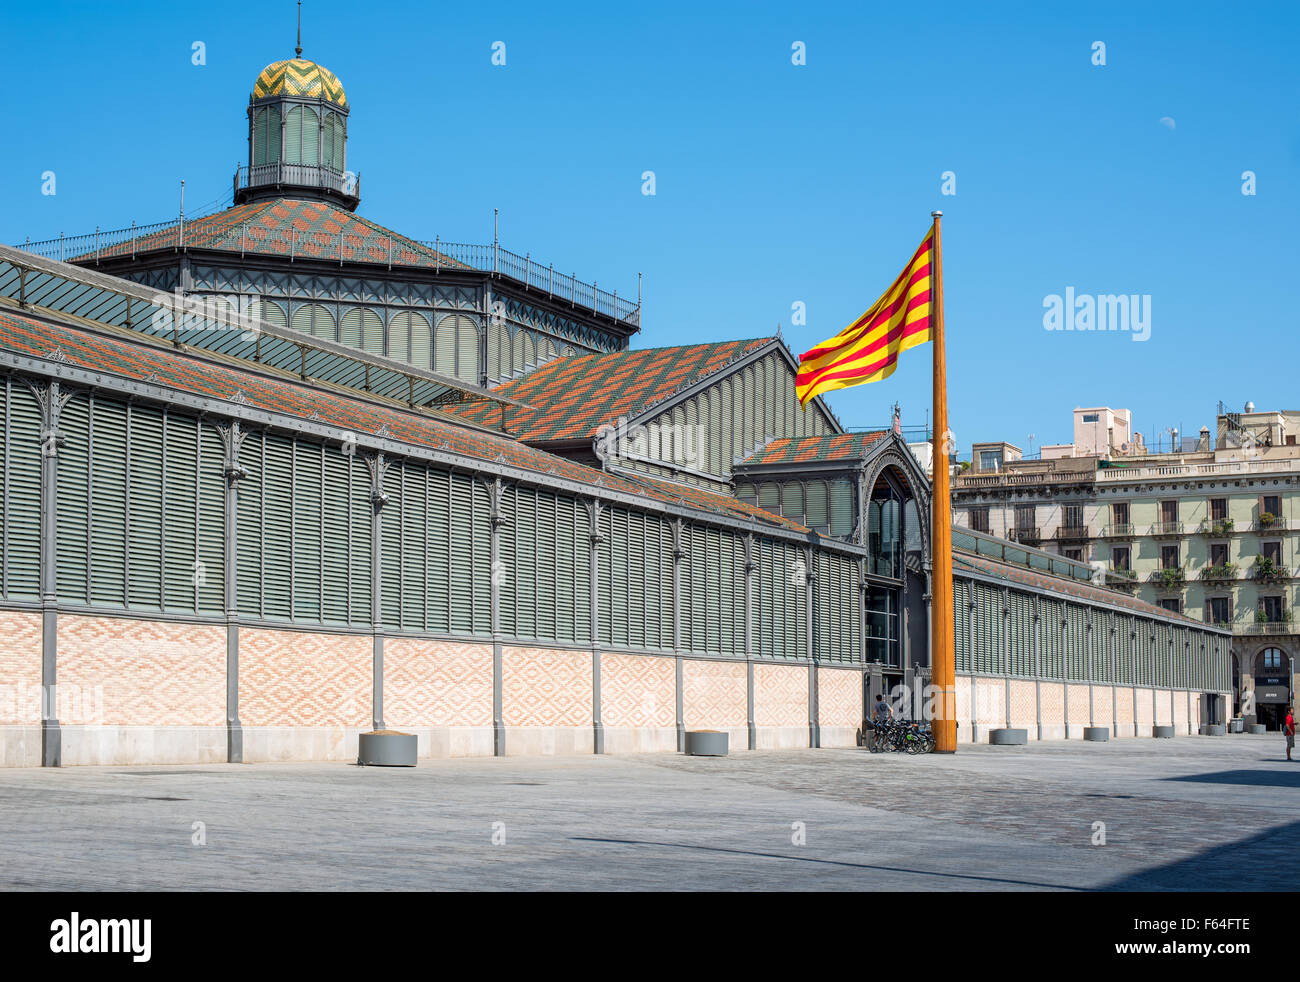 The principal facade of El Born market or Mercat del Born, chaired by the flag of Catalonia. Located in Barcelona, Spain. Stock Photo